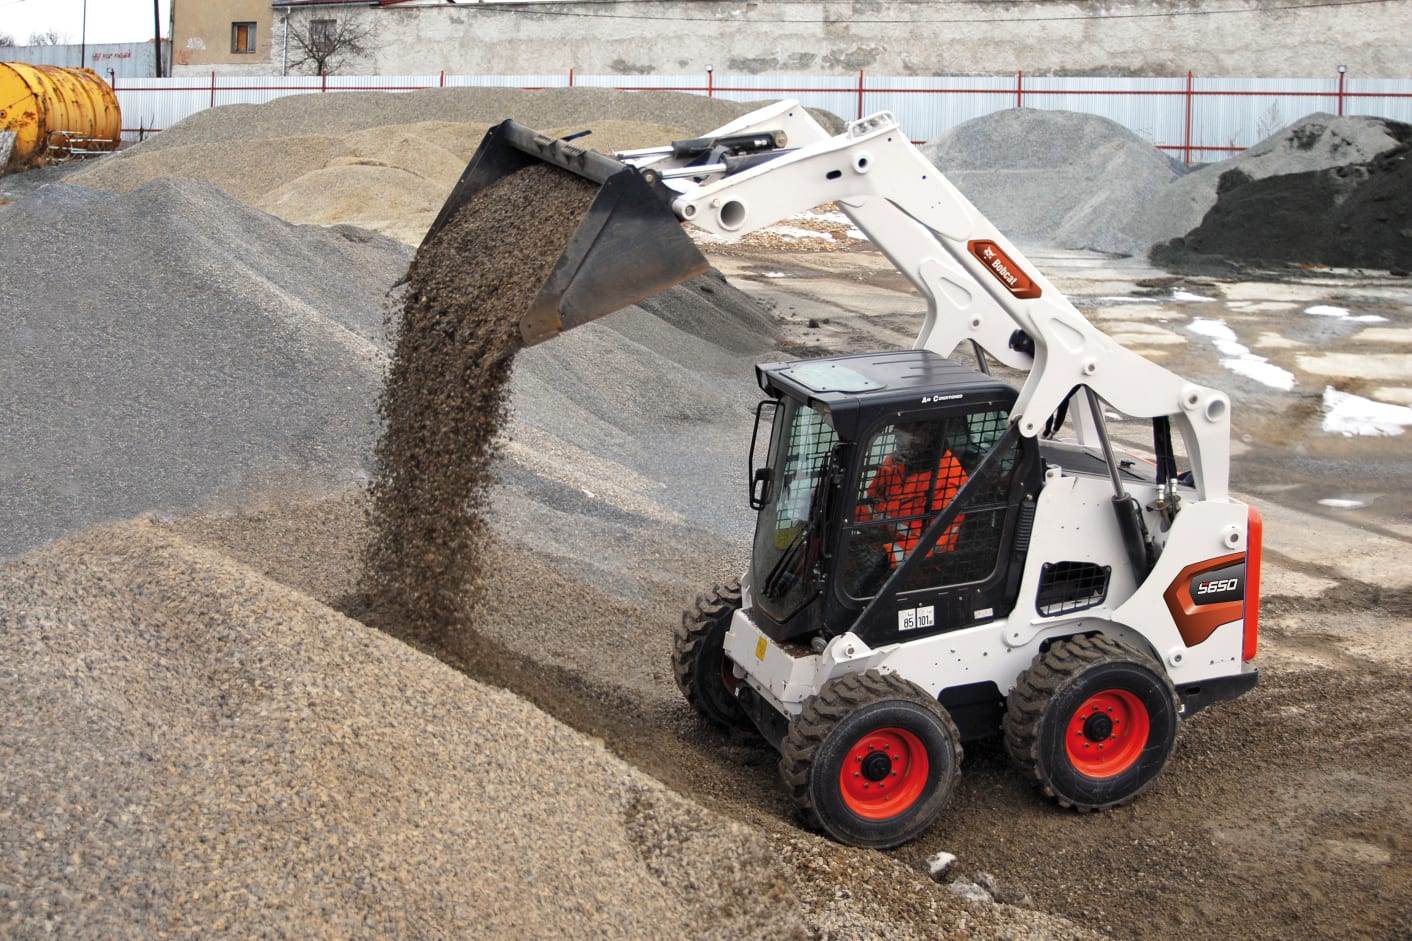 Browse Specs and more for the Bobcat S650 Skid-Steer Loader - White Star Machinery